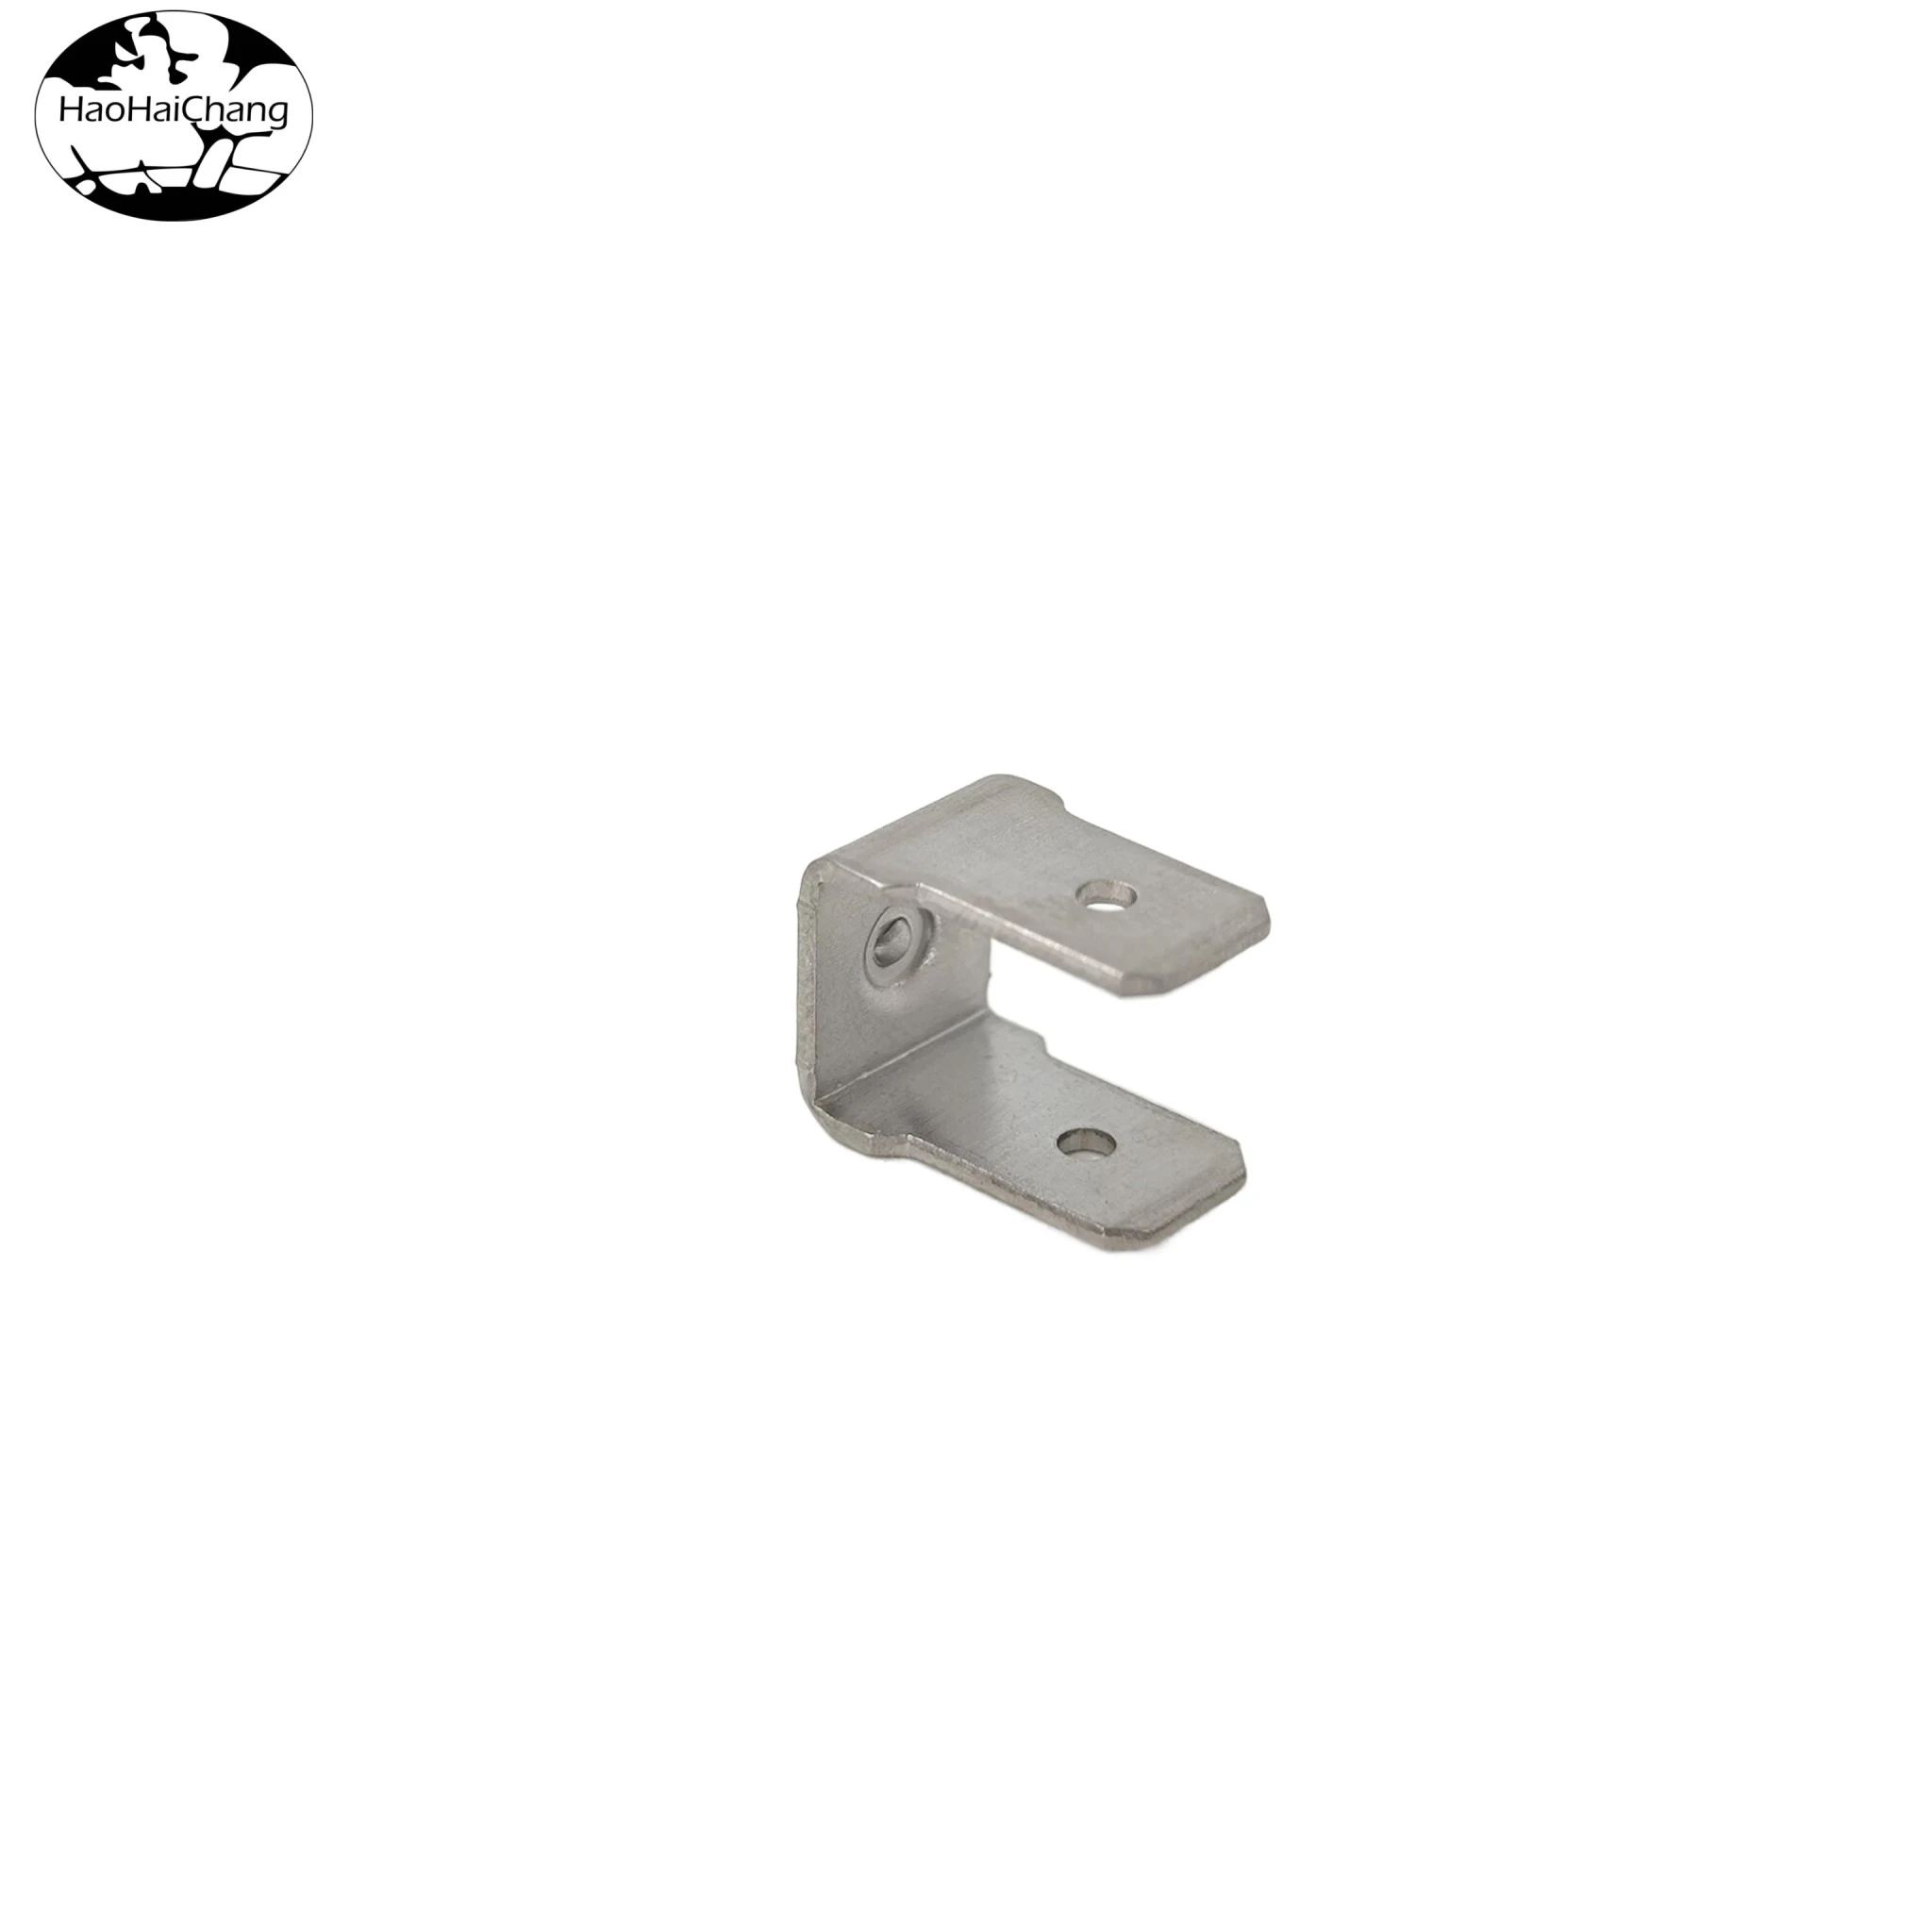 HHC-0190 Connector